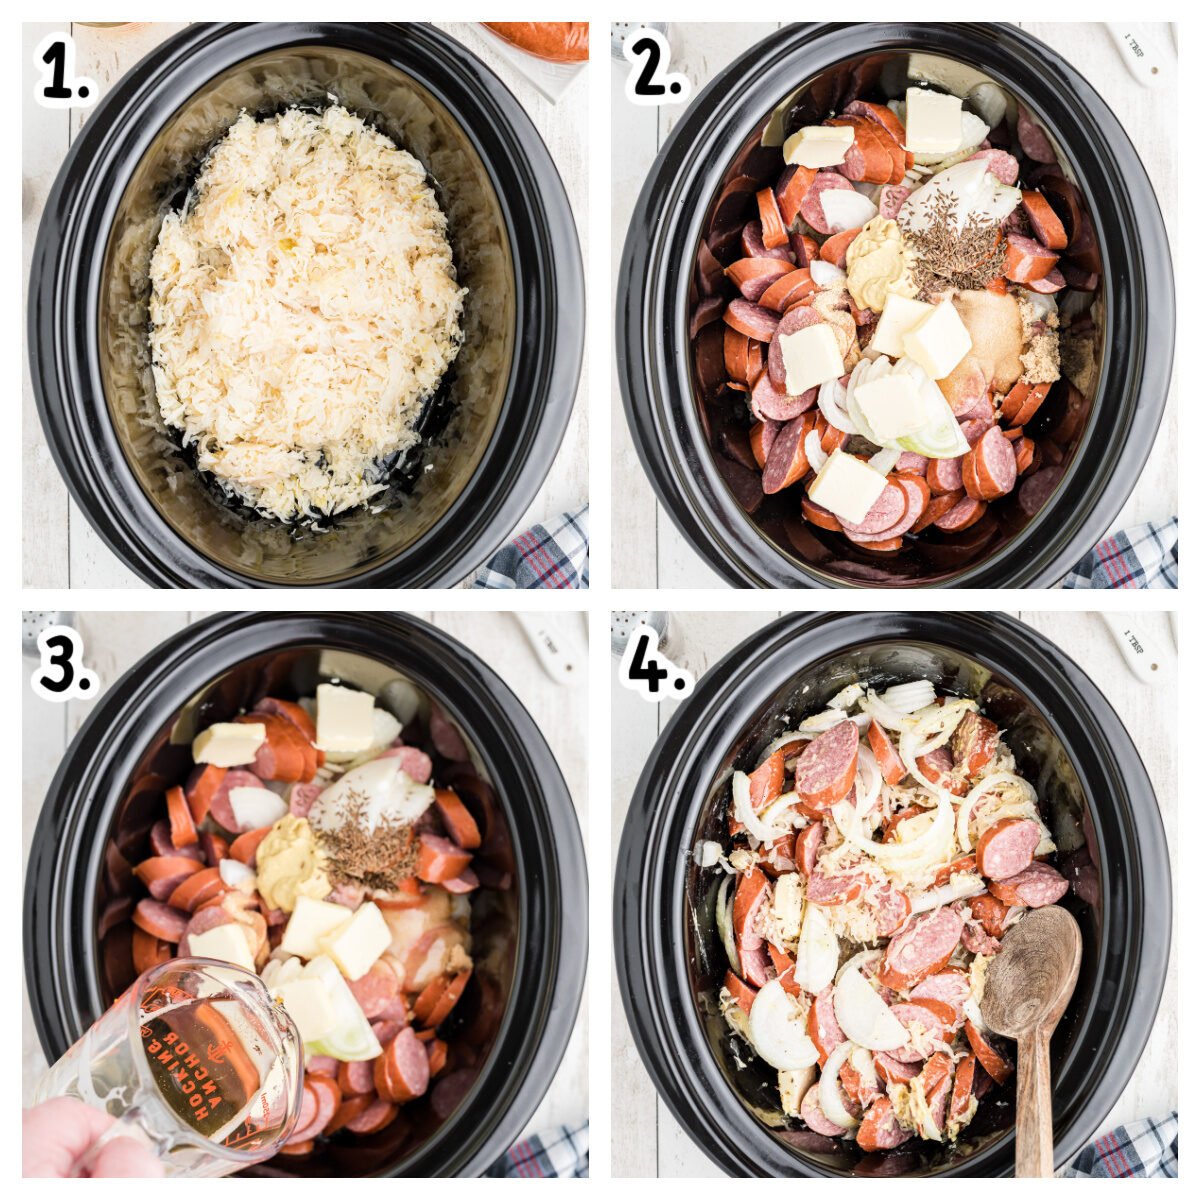 four images about how to make kielbasa and sauerkraut in the slow cooker.